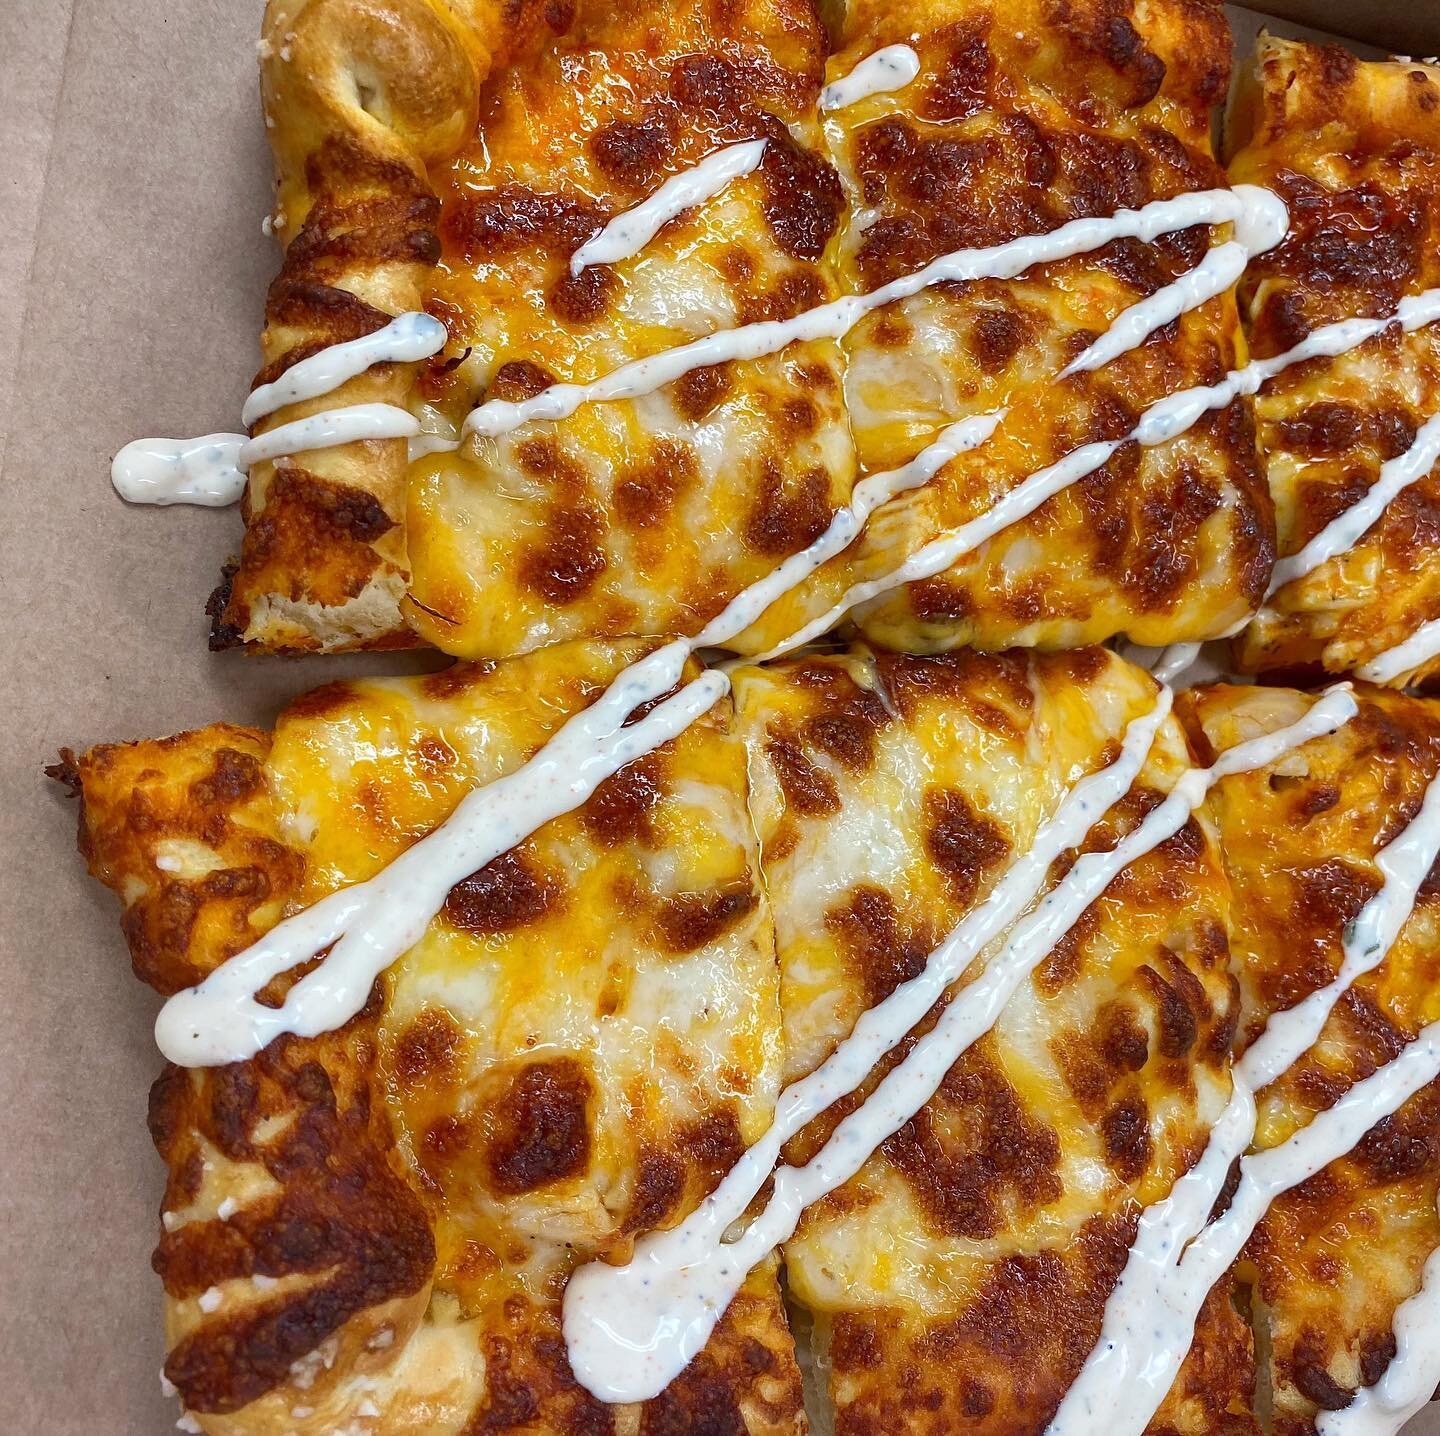 Buffalo Chicken Flatbread, with a drizzle of ranch?😻 Yes, Please!